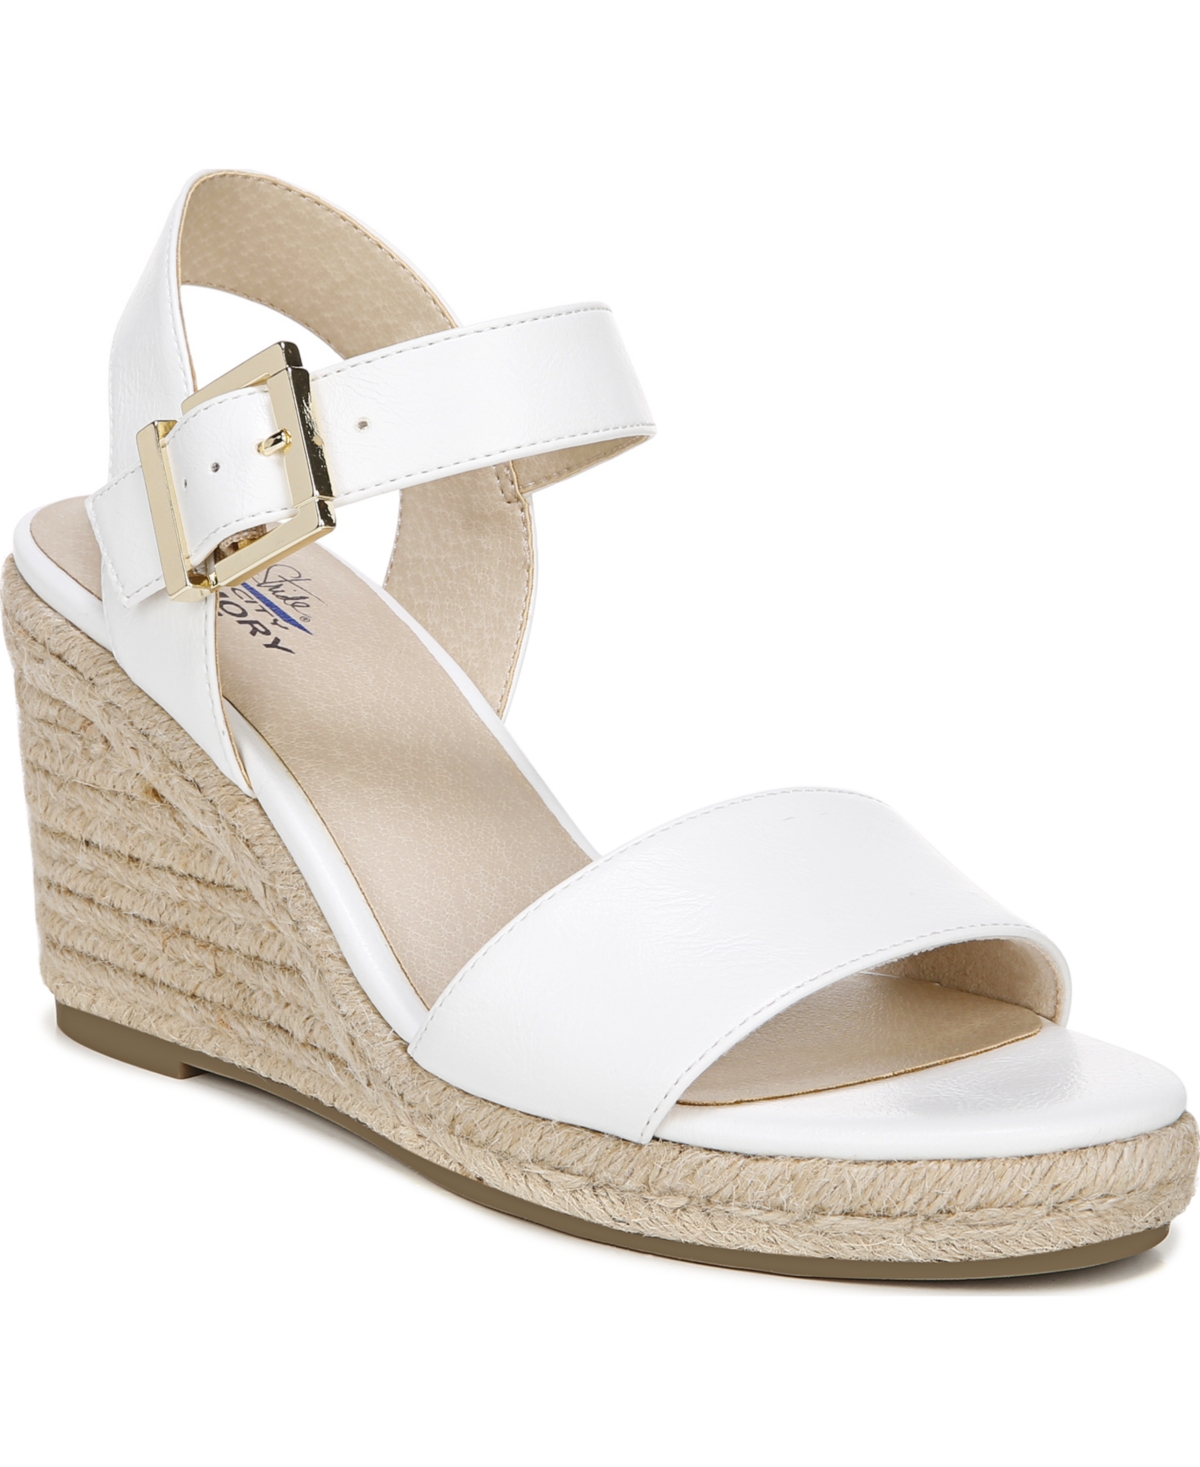 Shop Lifestride Women's Tango Espadrille Wedge Sandals In White Faux Leather